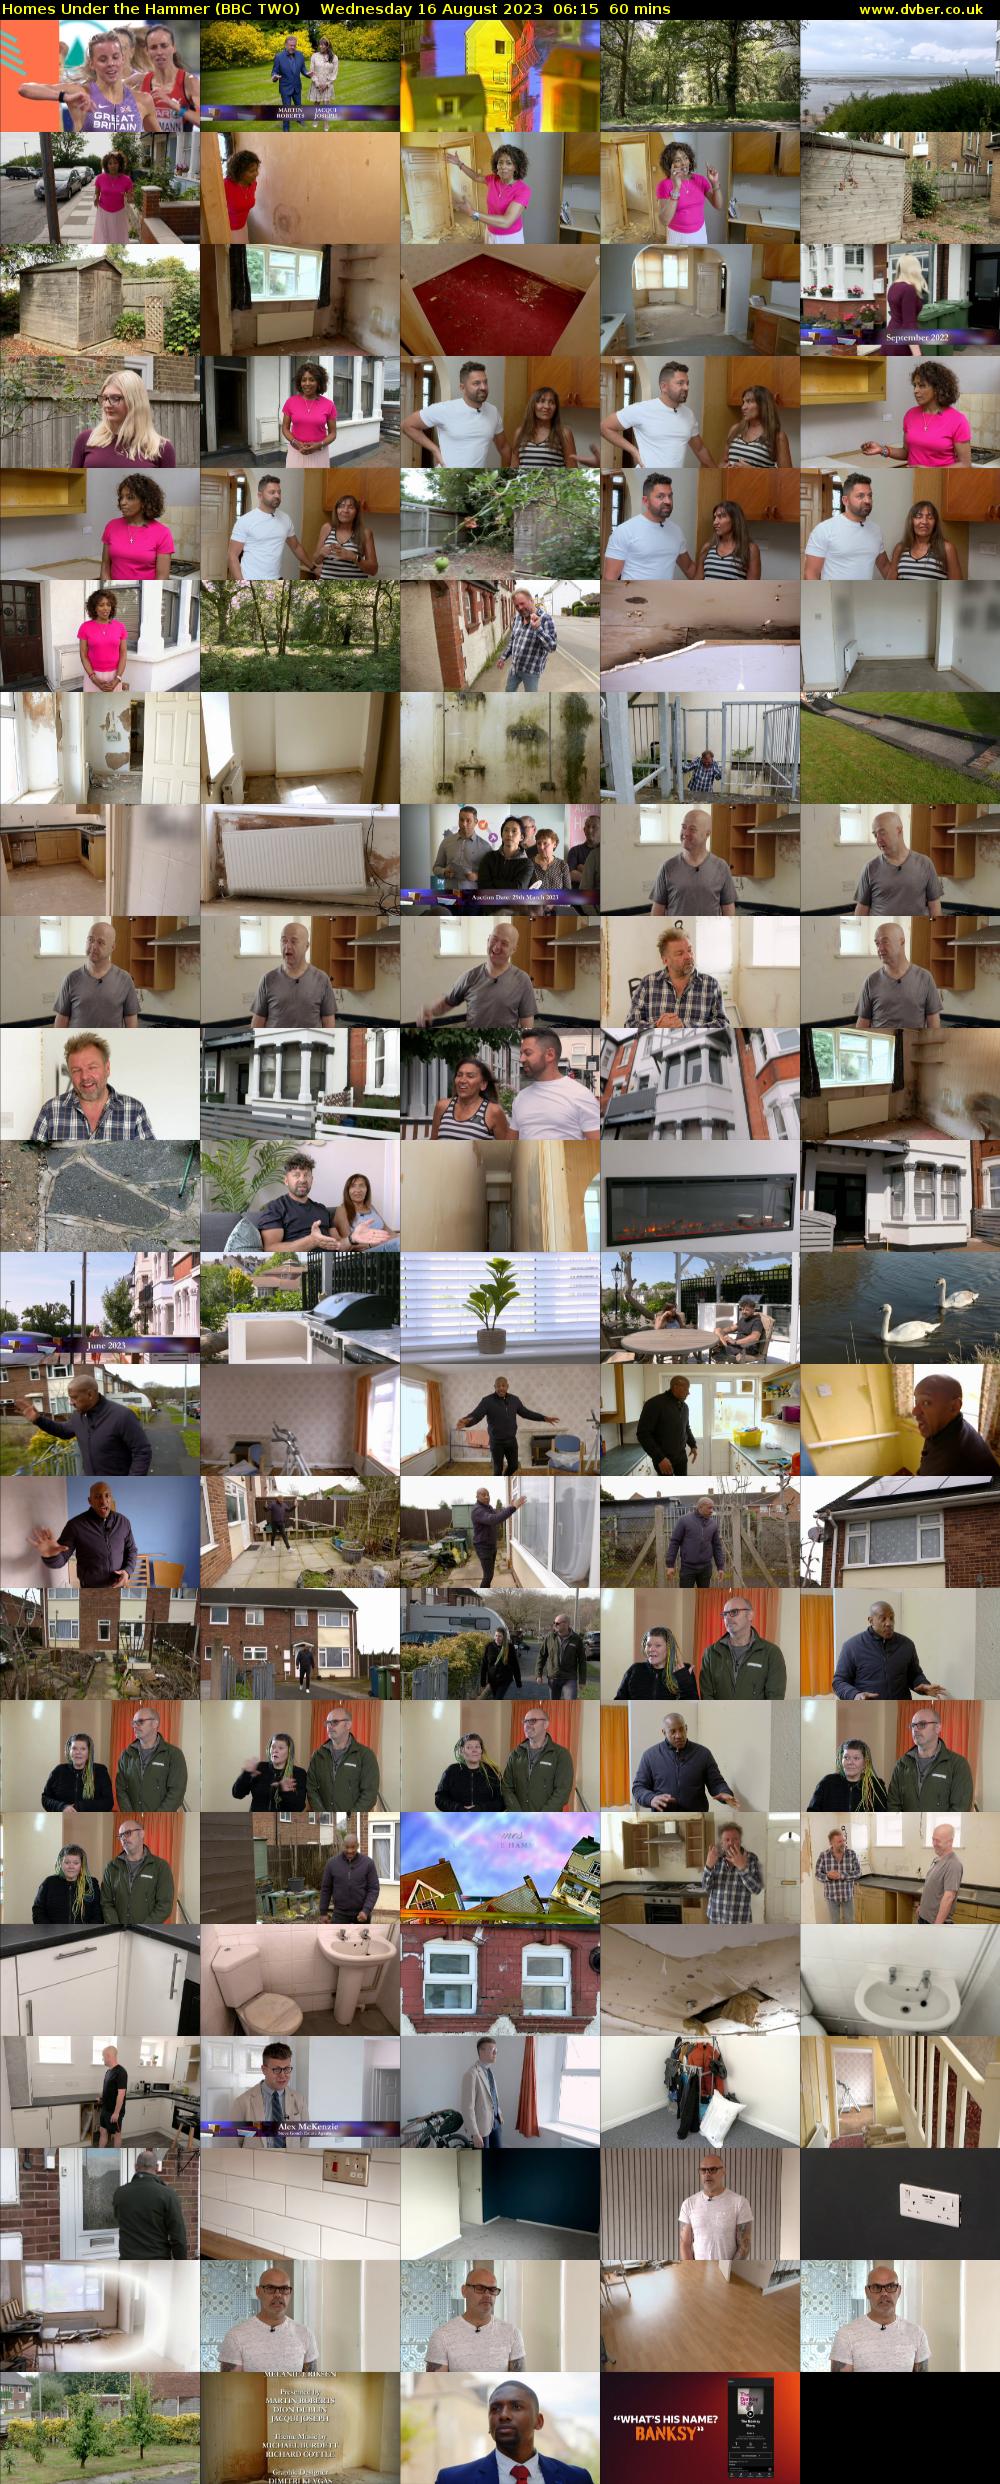 Homes Under the Hammer (BBC TWO) Wednesday 16 August 2023 06:15 - 07:15